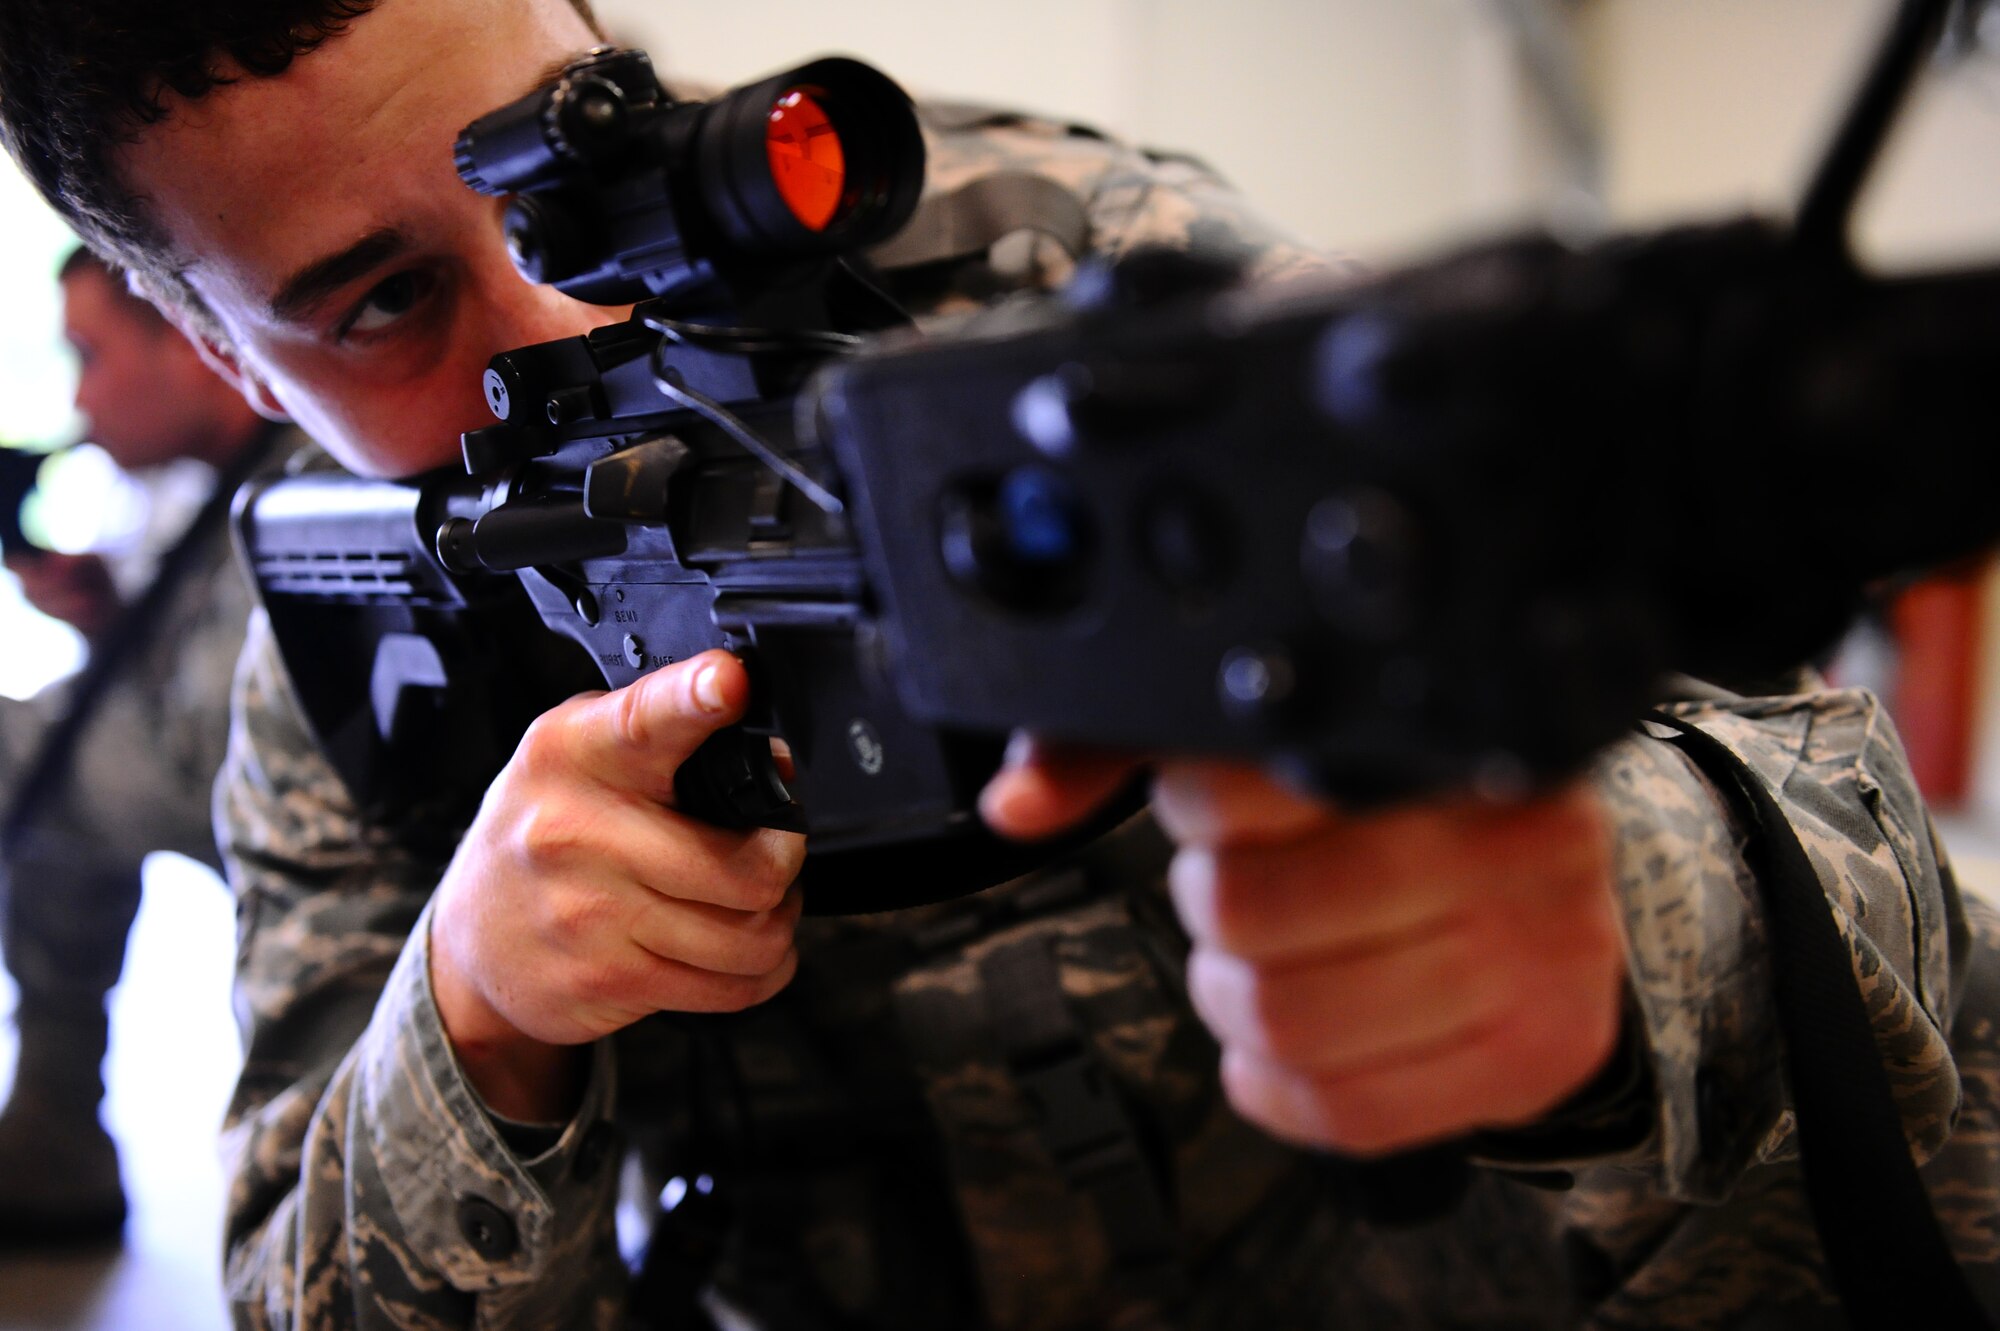 SPANGDAHLEM AIR BASE, Germany -- Airman 1st Class Alec Cox, 52nd Security Forces Squadron patrolman, aims down his sights during a “Shoot, Move, Communicate” training course here Aug. 22. The training teaches Airmen to react to a hostile shooter by using cover and effective communication to maneuver and engage the target. (U.S. Air Force photo/Staff Sgt. Nathanael Callon)